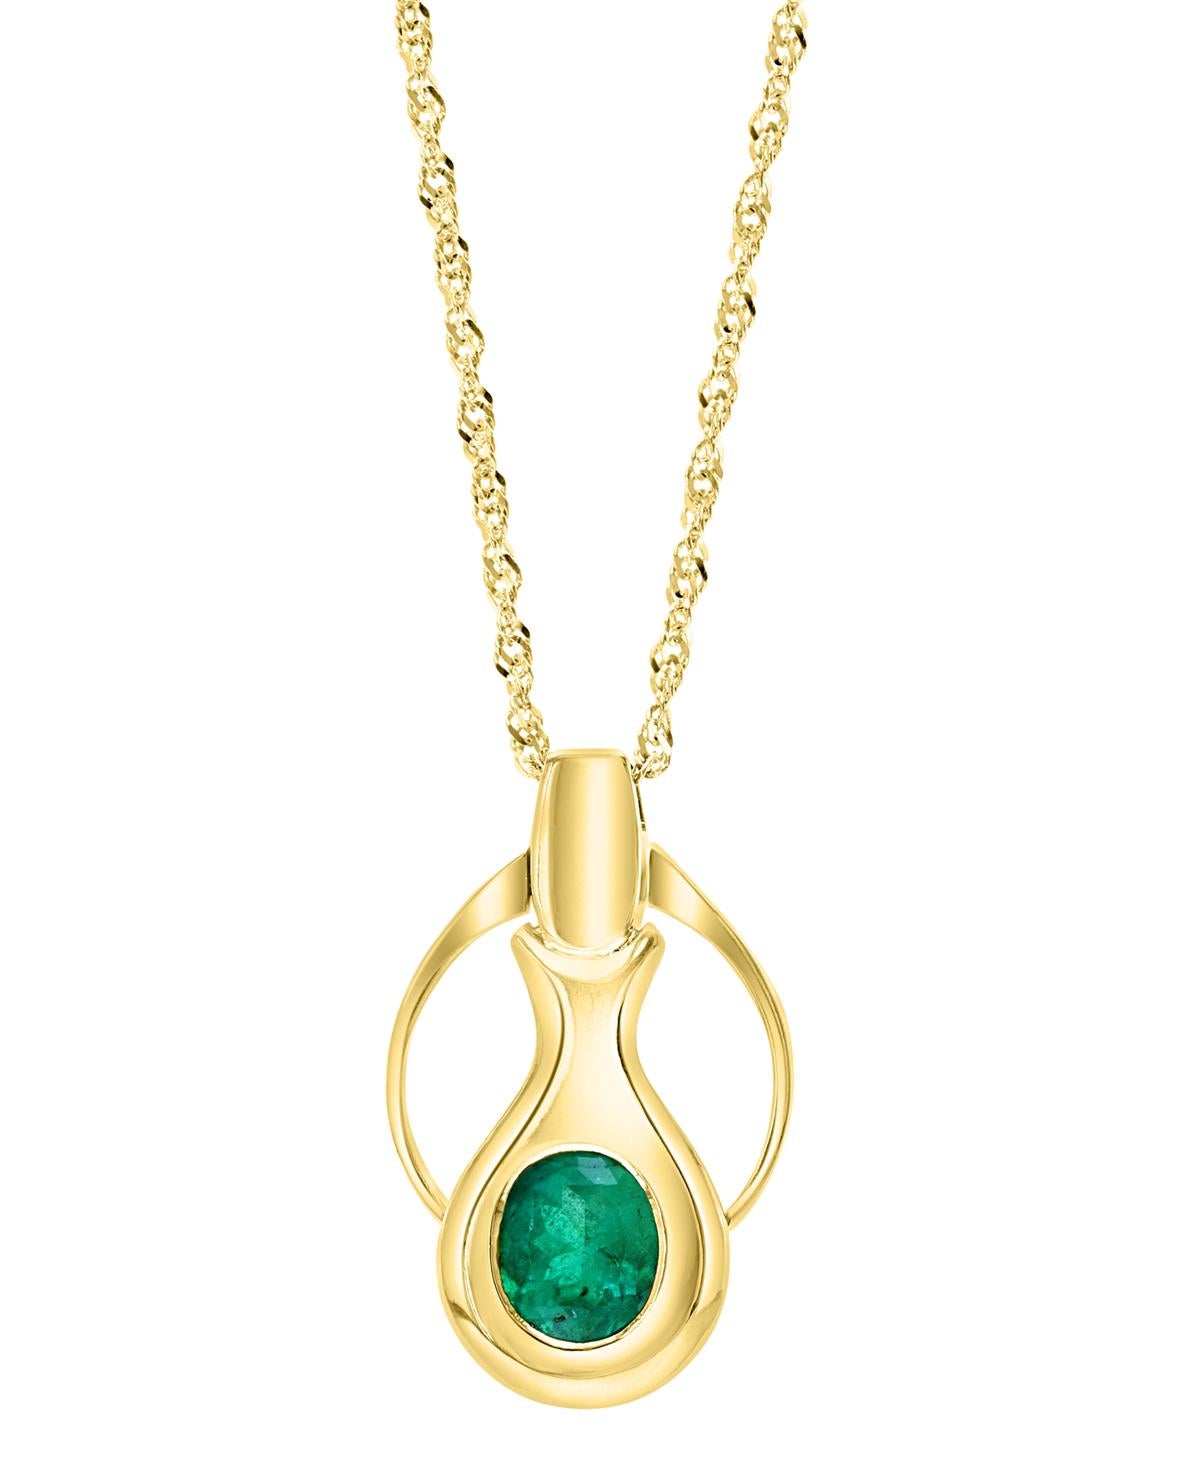 4Ct Colombian Emerald Pendent/Necklace 18 Karat Gold Estate Convertible to Ring For Sale 4